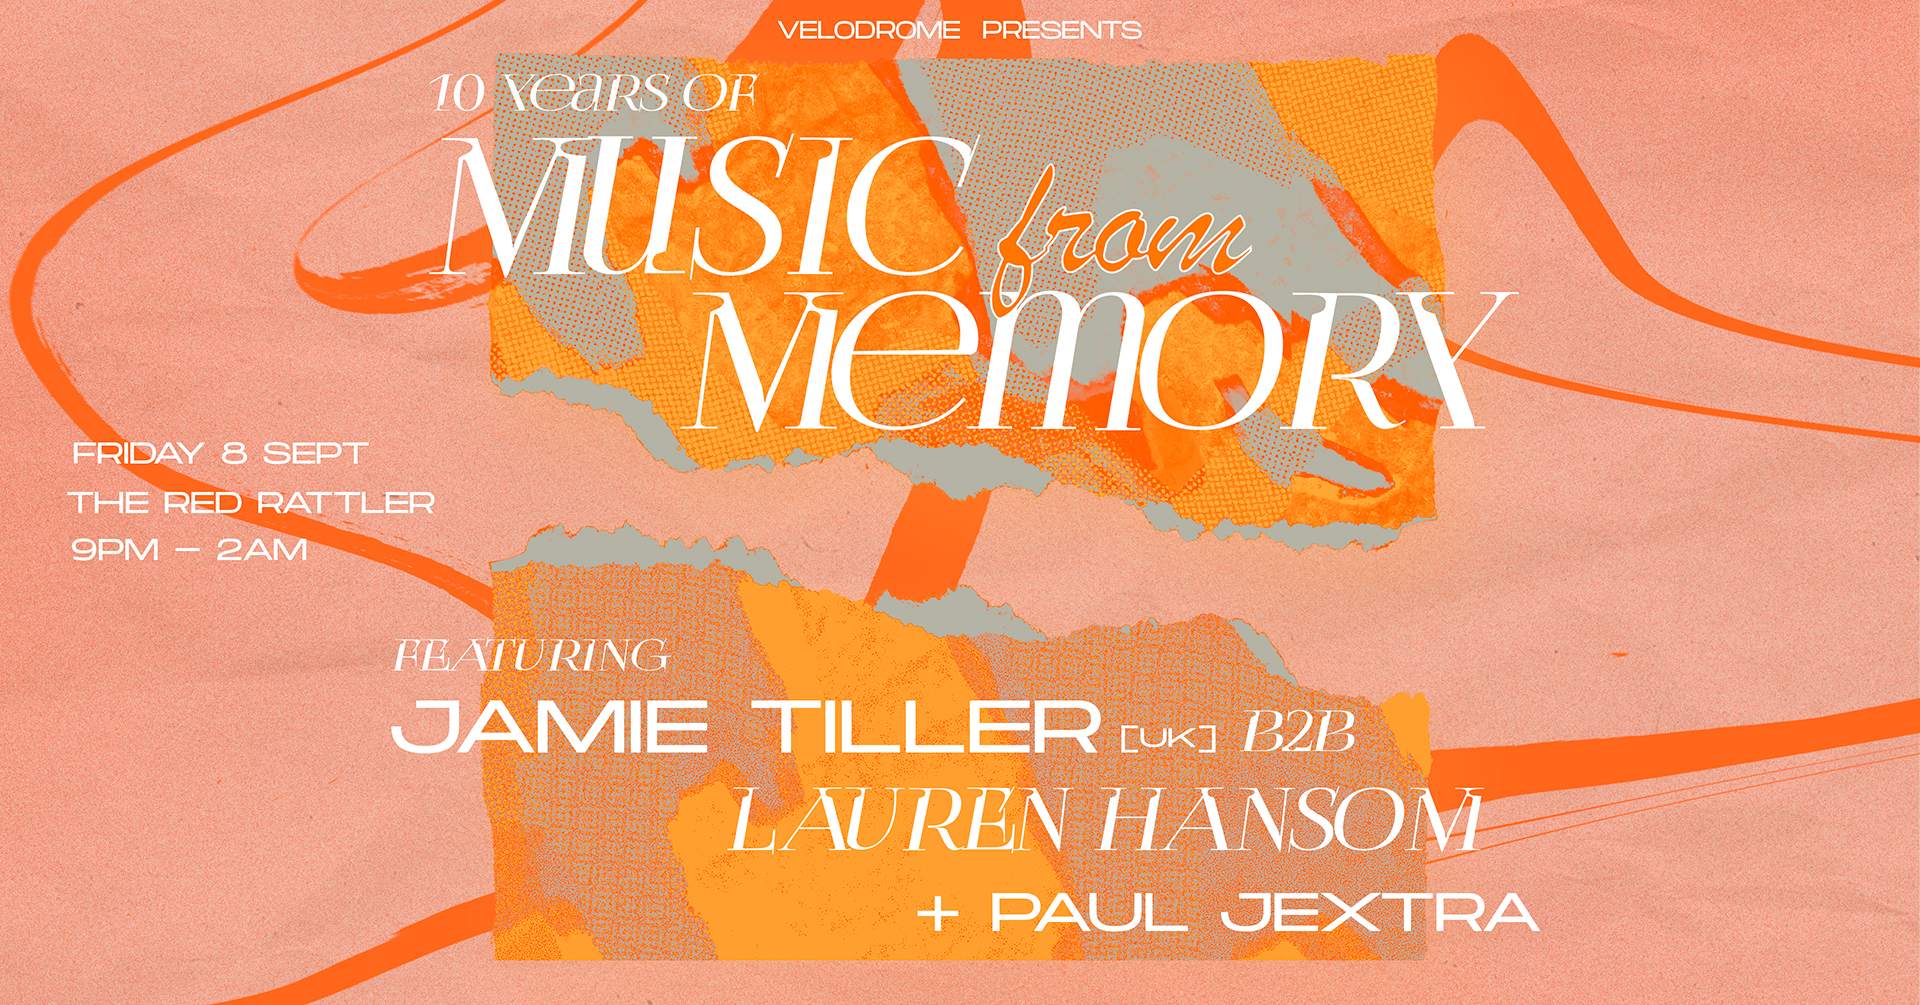 Velodrome presents: 10 Years of Music From Memory - Página frontal